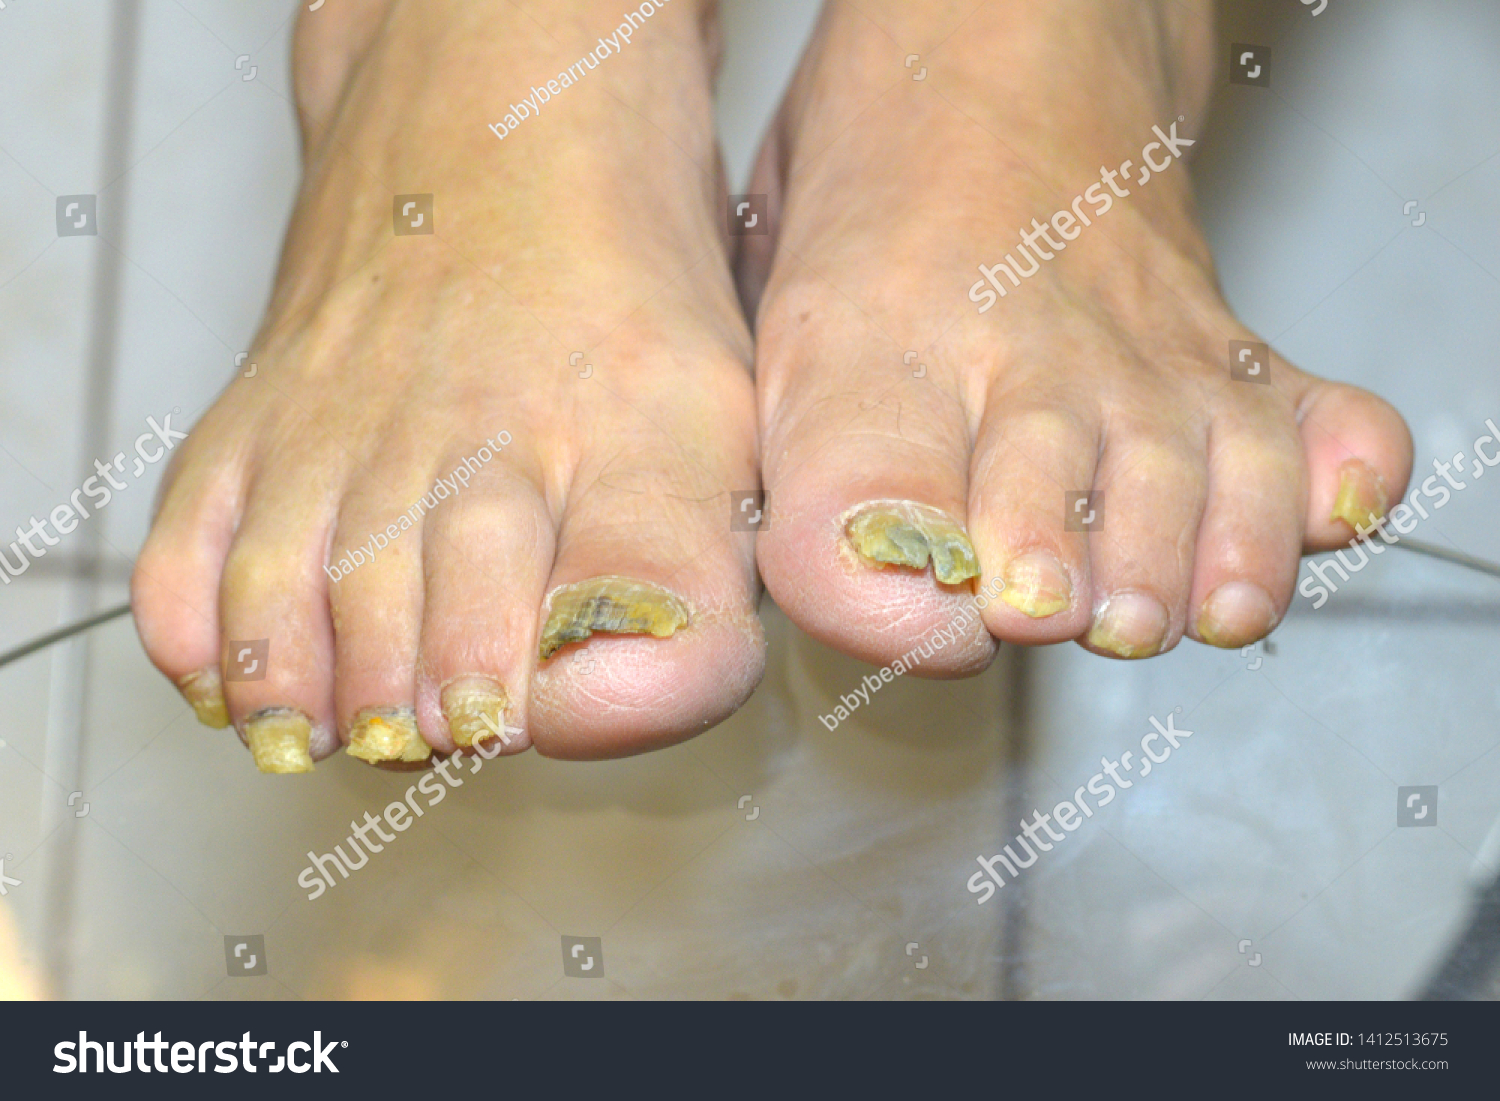 feet dry and cracked fungus